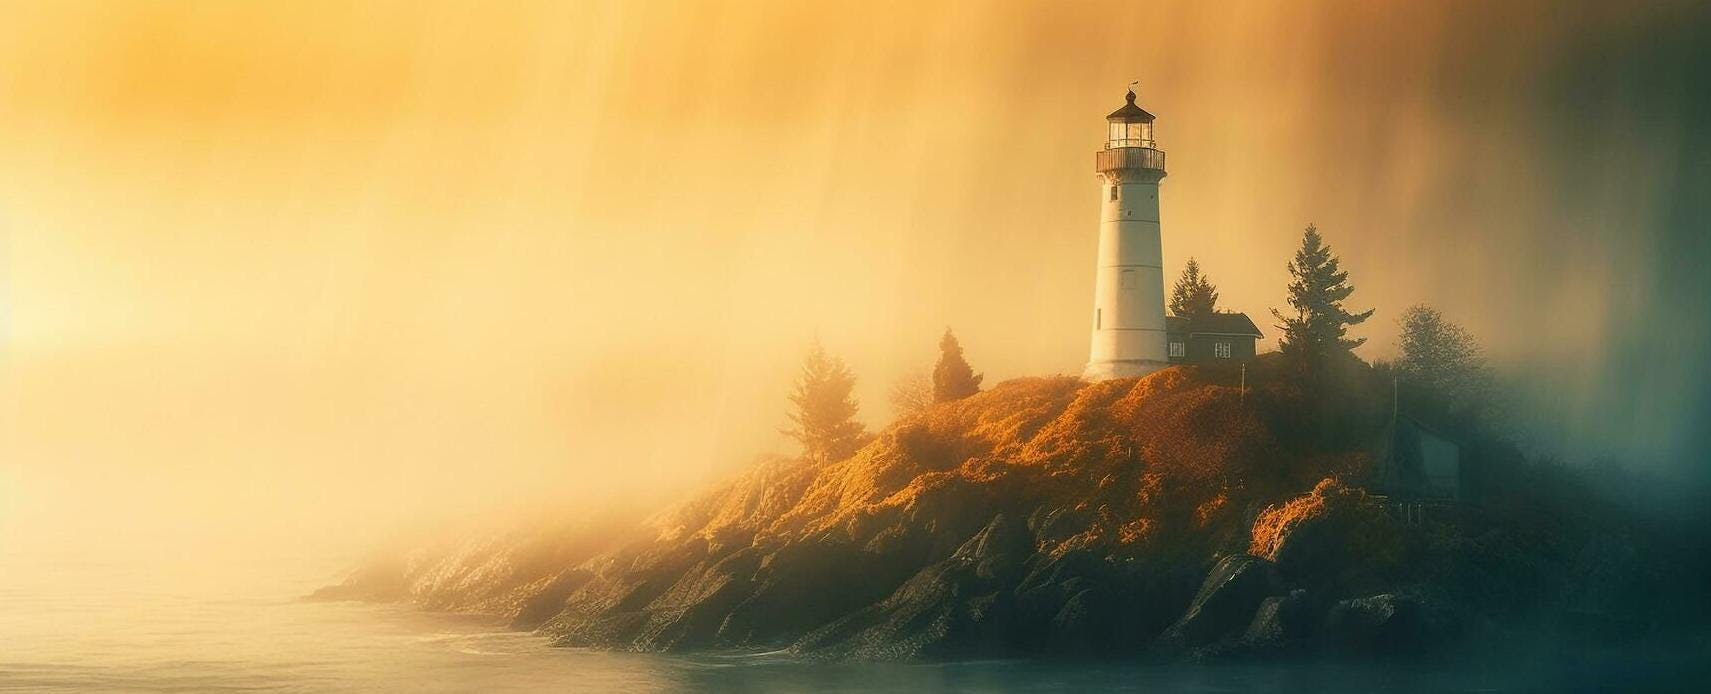 An image of a lighthouse in fog.